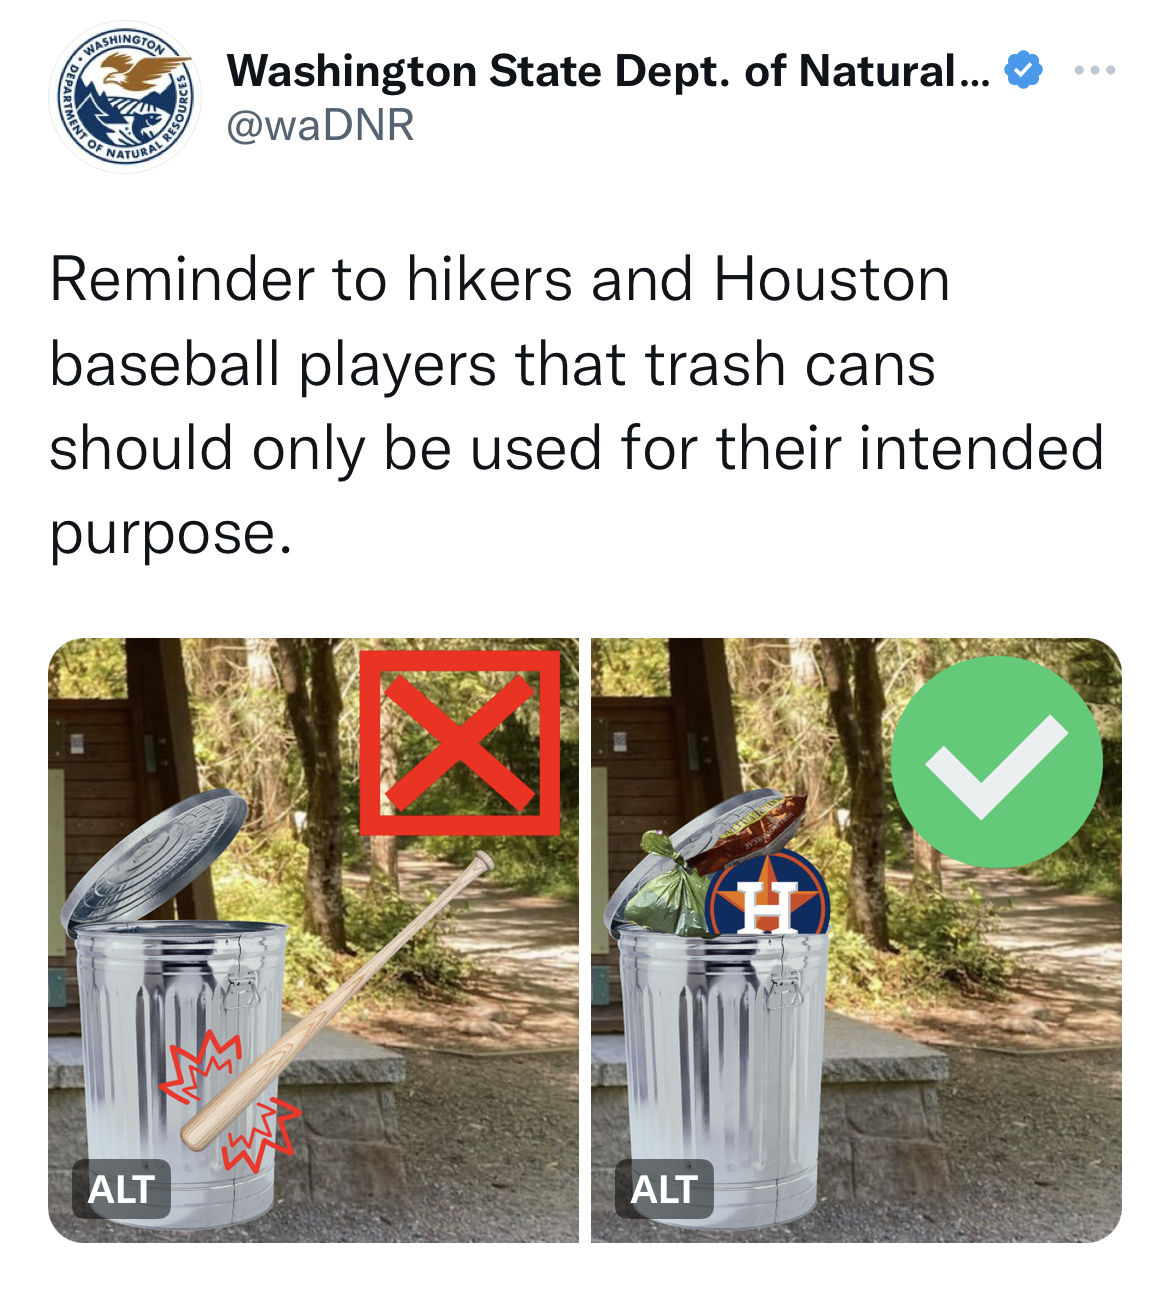 Washington Department of Natural Resources tweets - water - Washington State Dept. of Natural... Reminder to hikers and Houston baseball players that trash cans should only be used for their intended purpose. Alt Alt H